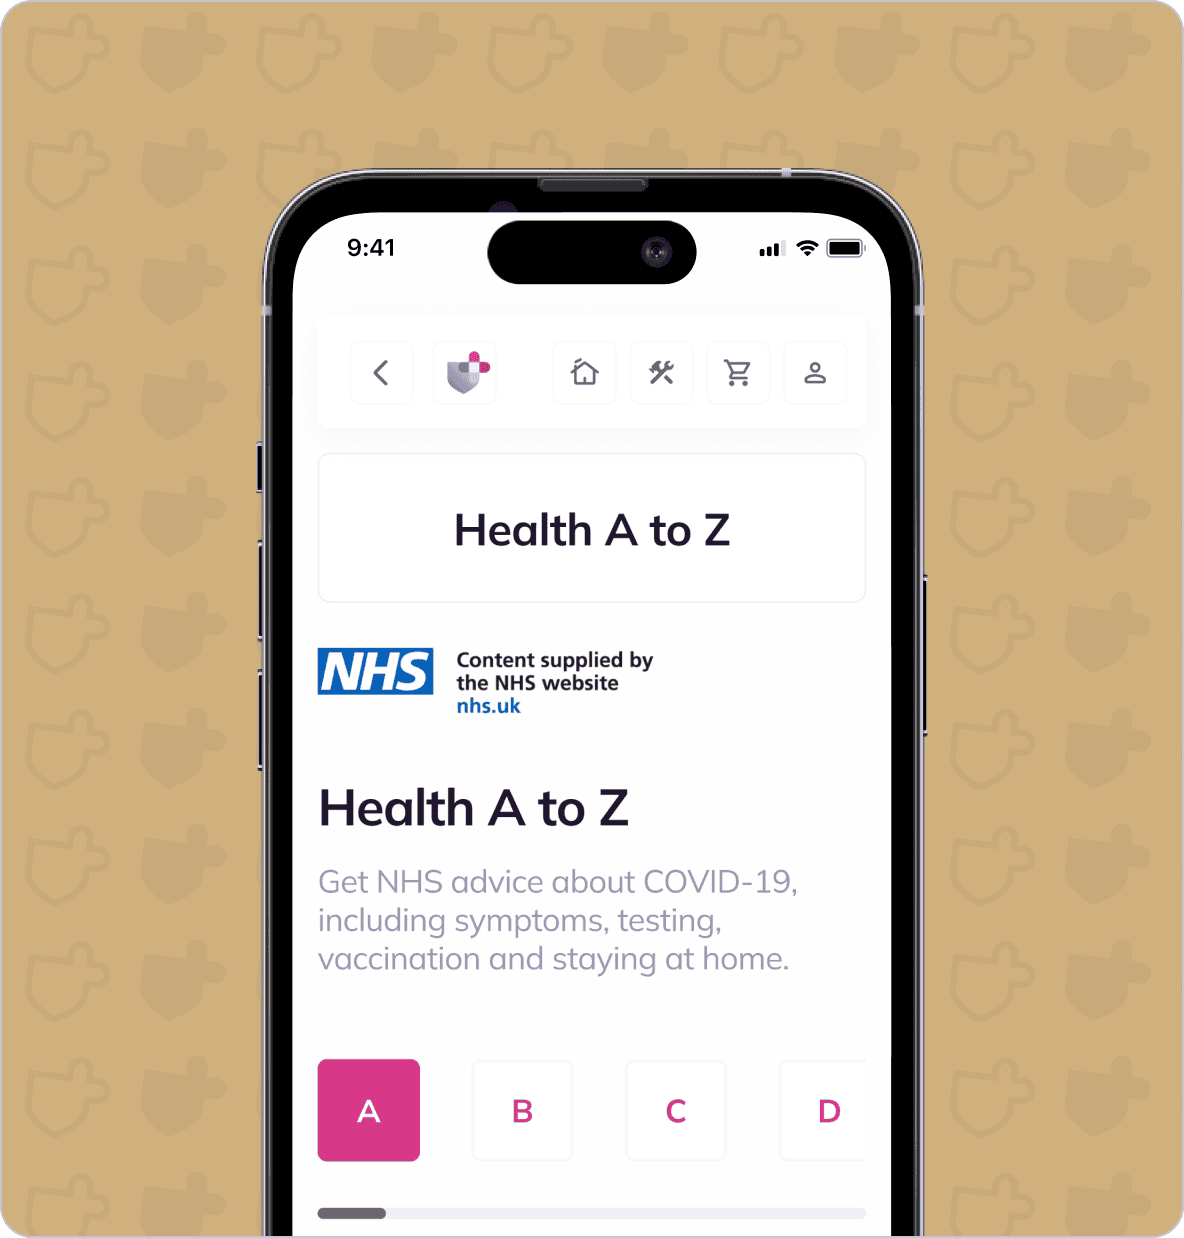 A smartphone displaying the NHS "Health A to Z" webpage, featuring advice on COVID-19 symptoms, testing, vaccination, and staying at home.